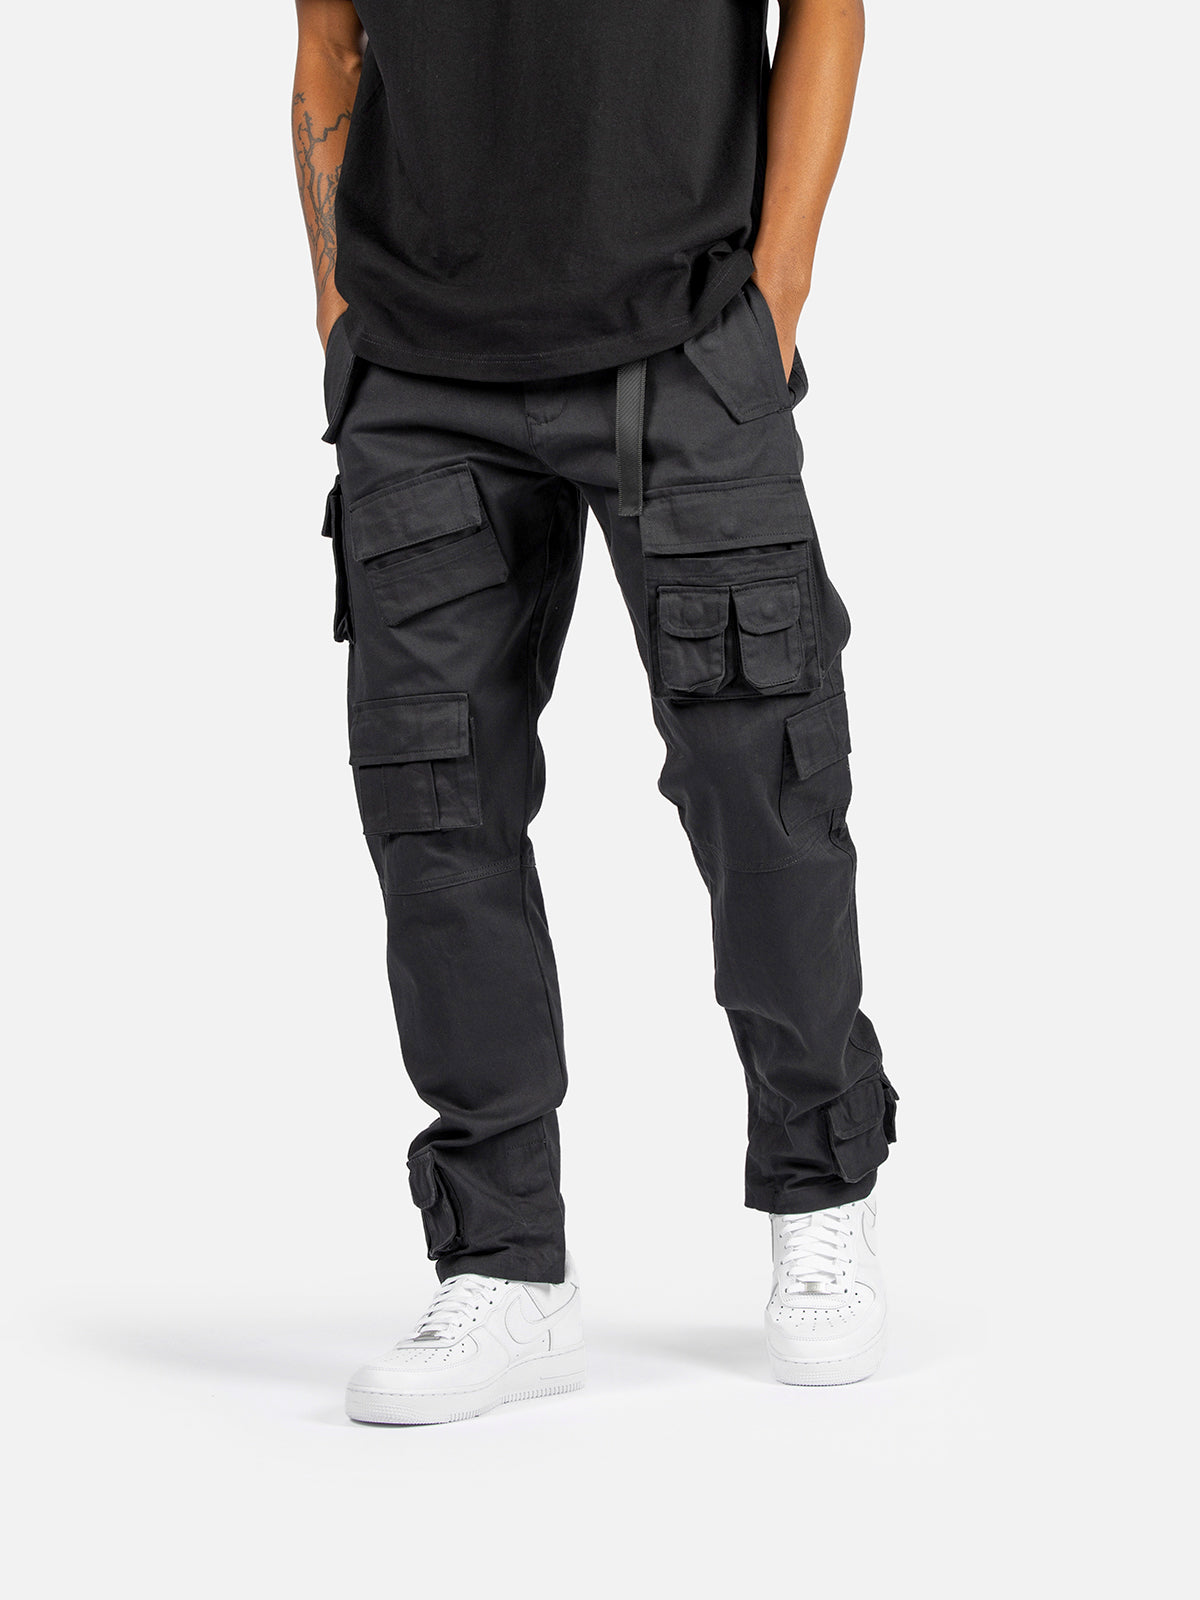 Xyriel - High Waisted Utility Style Cargo Pants in Black